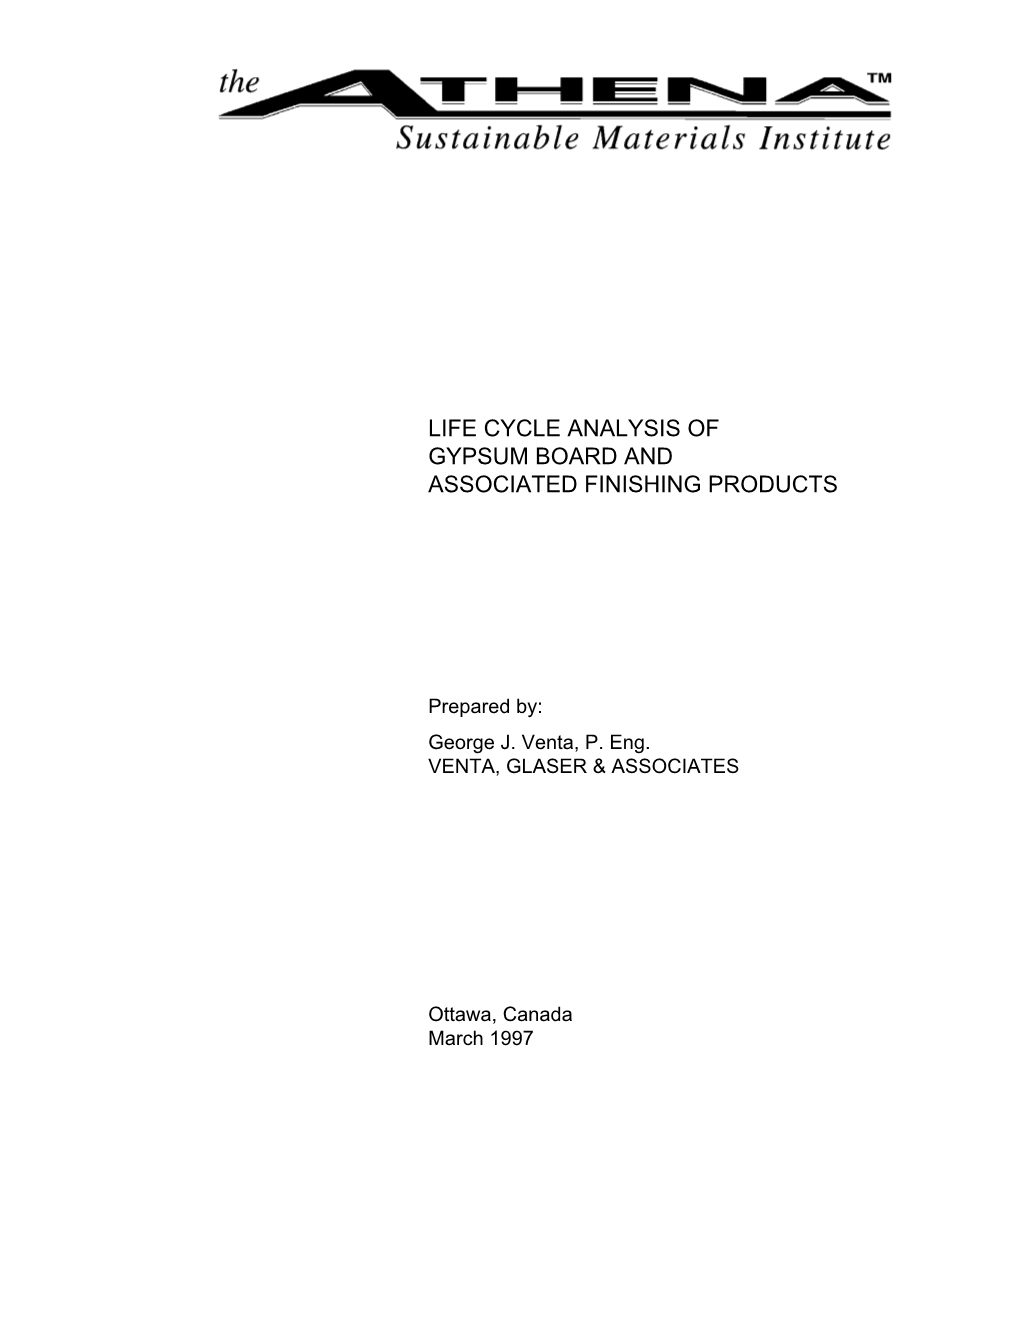 Life Cycle Analysis of Gypsum Board and Associated Finishing Products